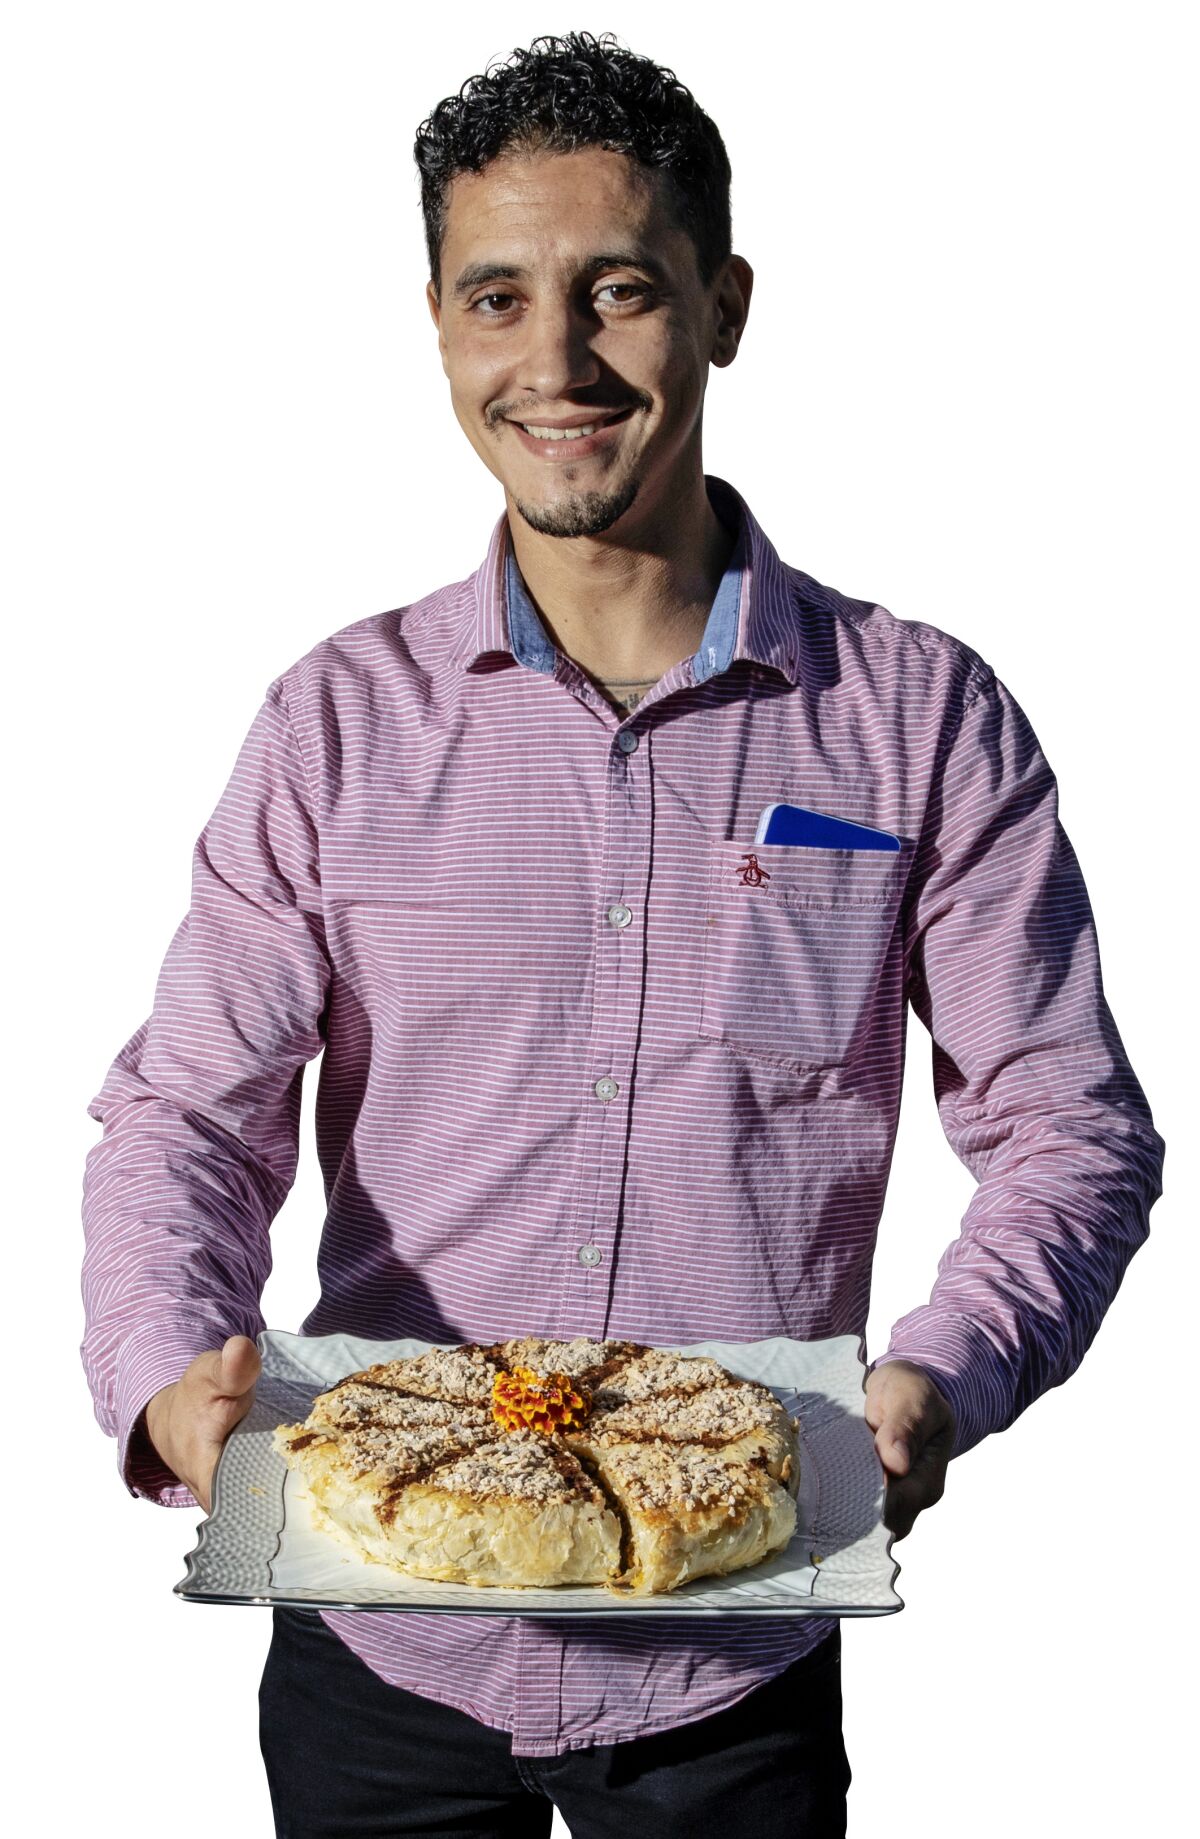 Abdu spent hours on the phone with his mother to re-create her recipe for Chicken Bastilla.